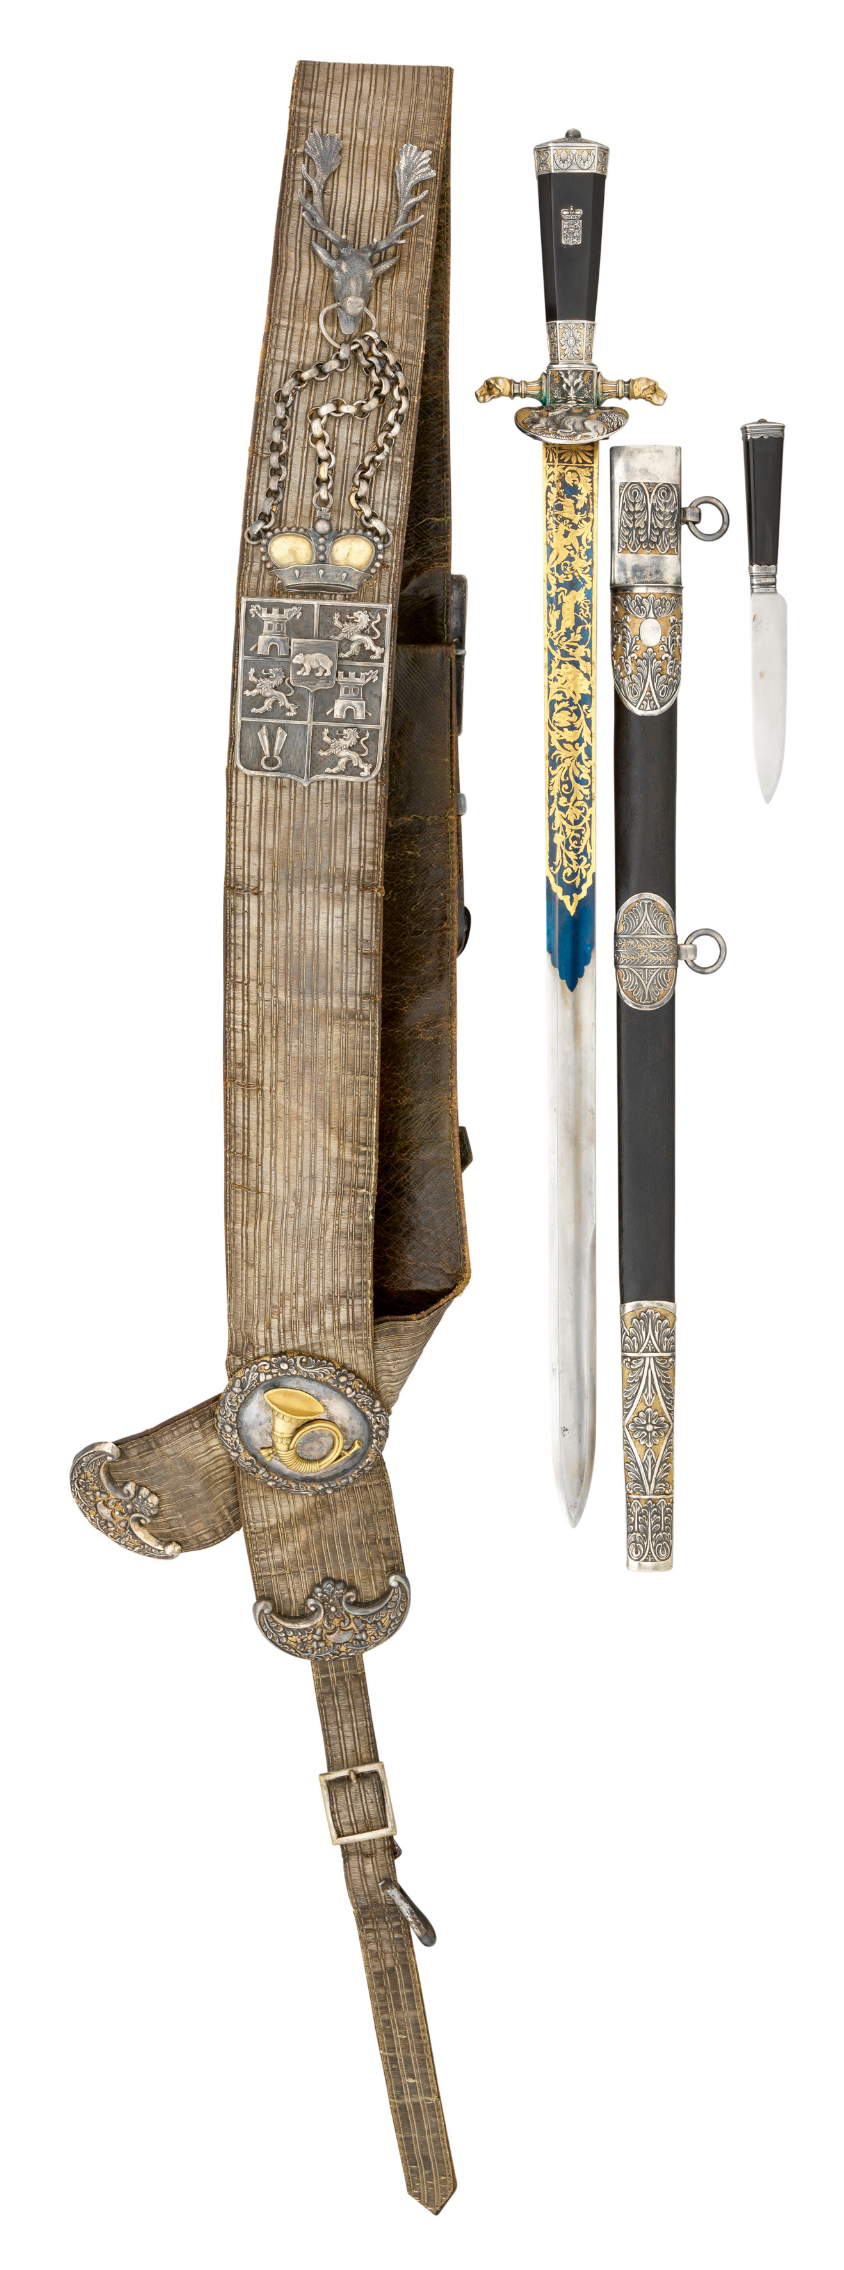 ˜A GERMAN DRESS HUNTING-SWORD AND COMPANION BALDRICK (GALABANDELIER), EARLY 20TH CENTURY AND LATER